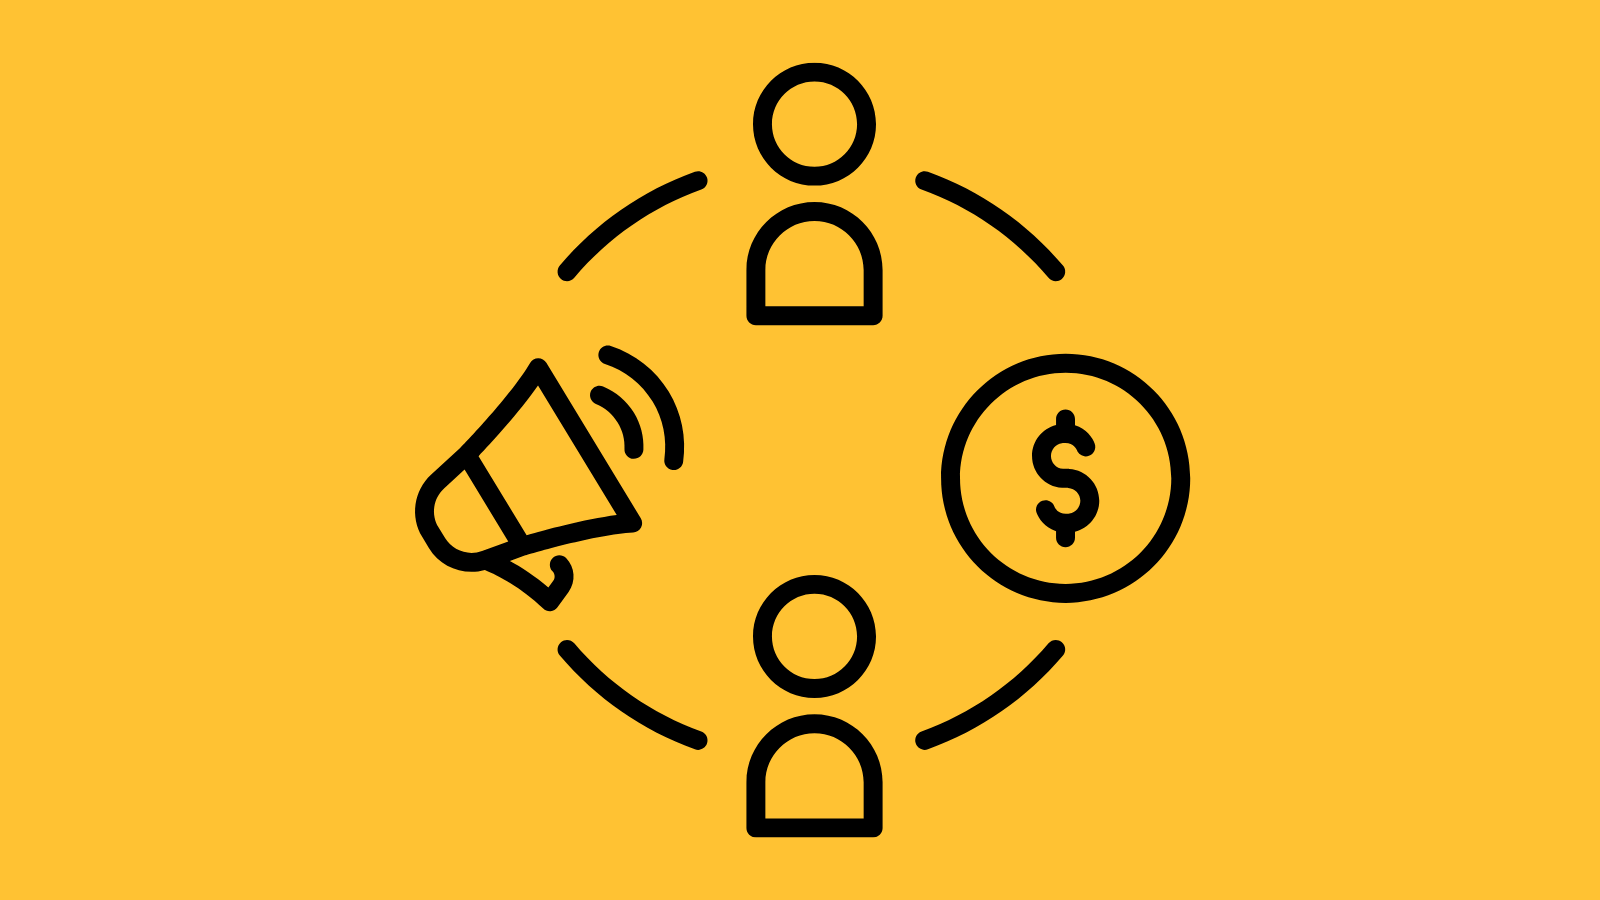 A megaphone, a dollar sign, and two people connected in a circle